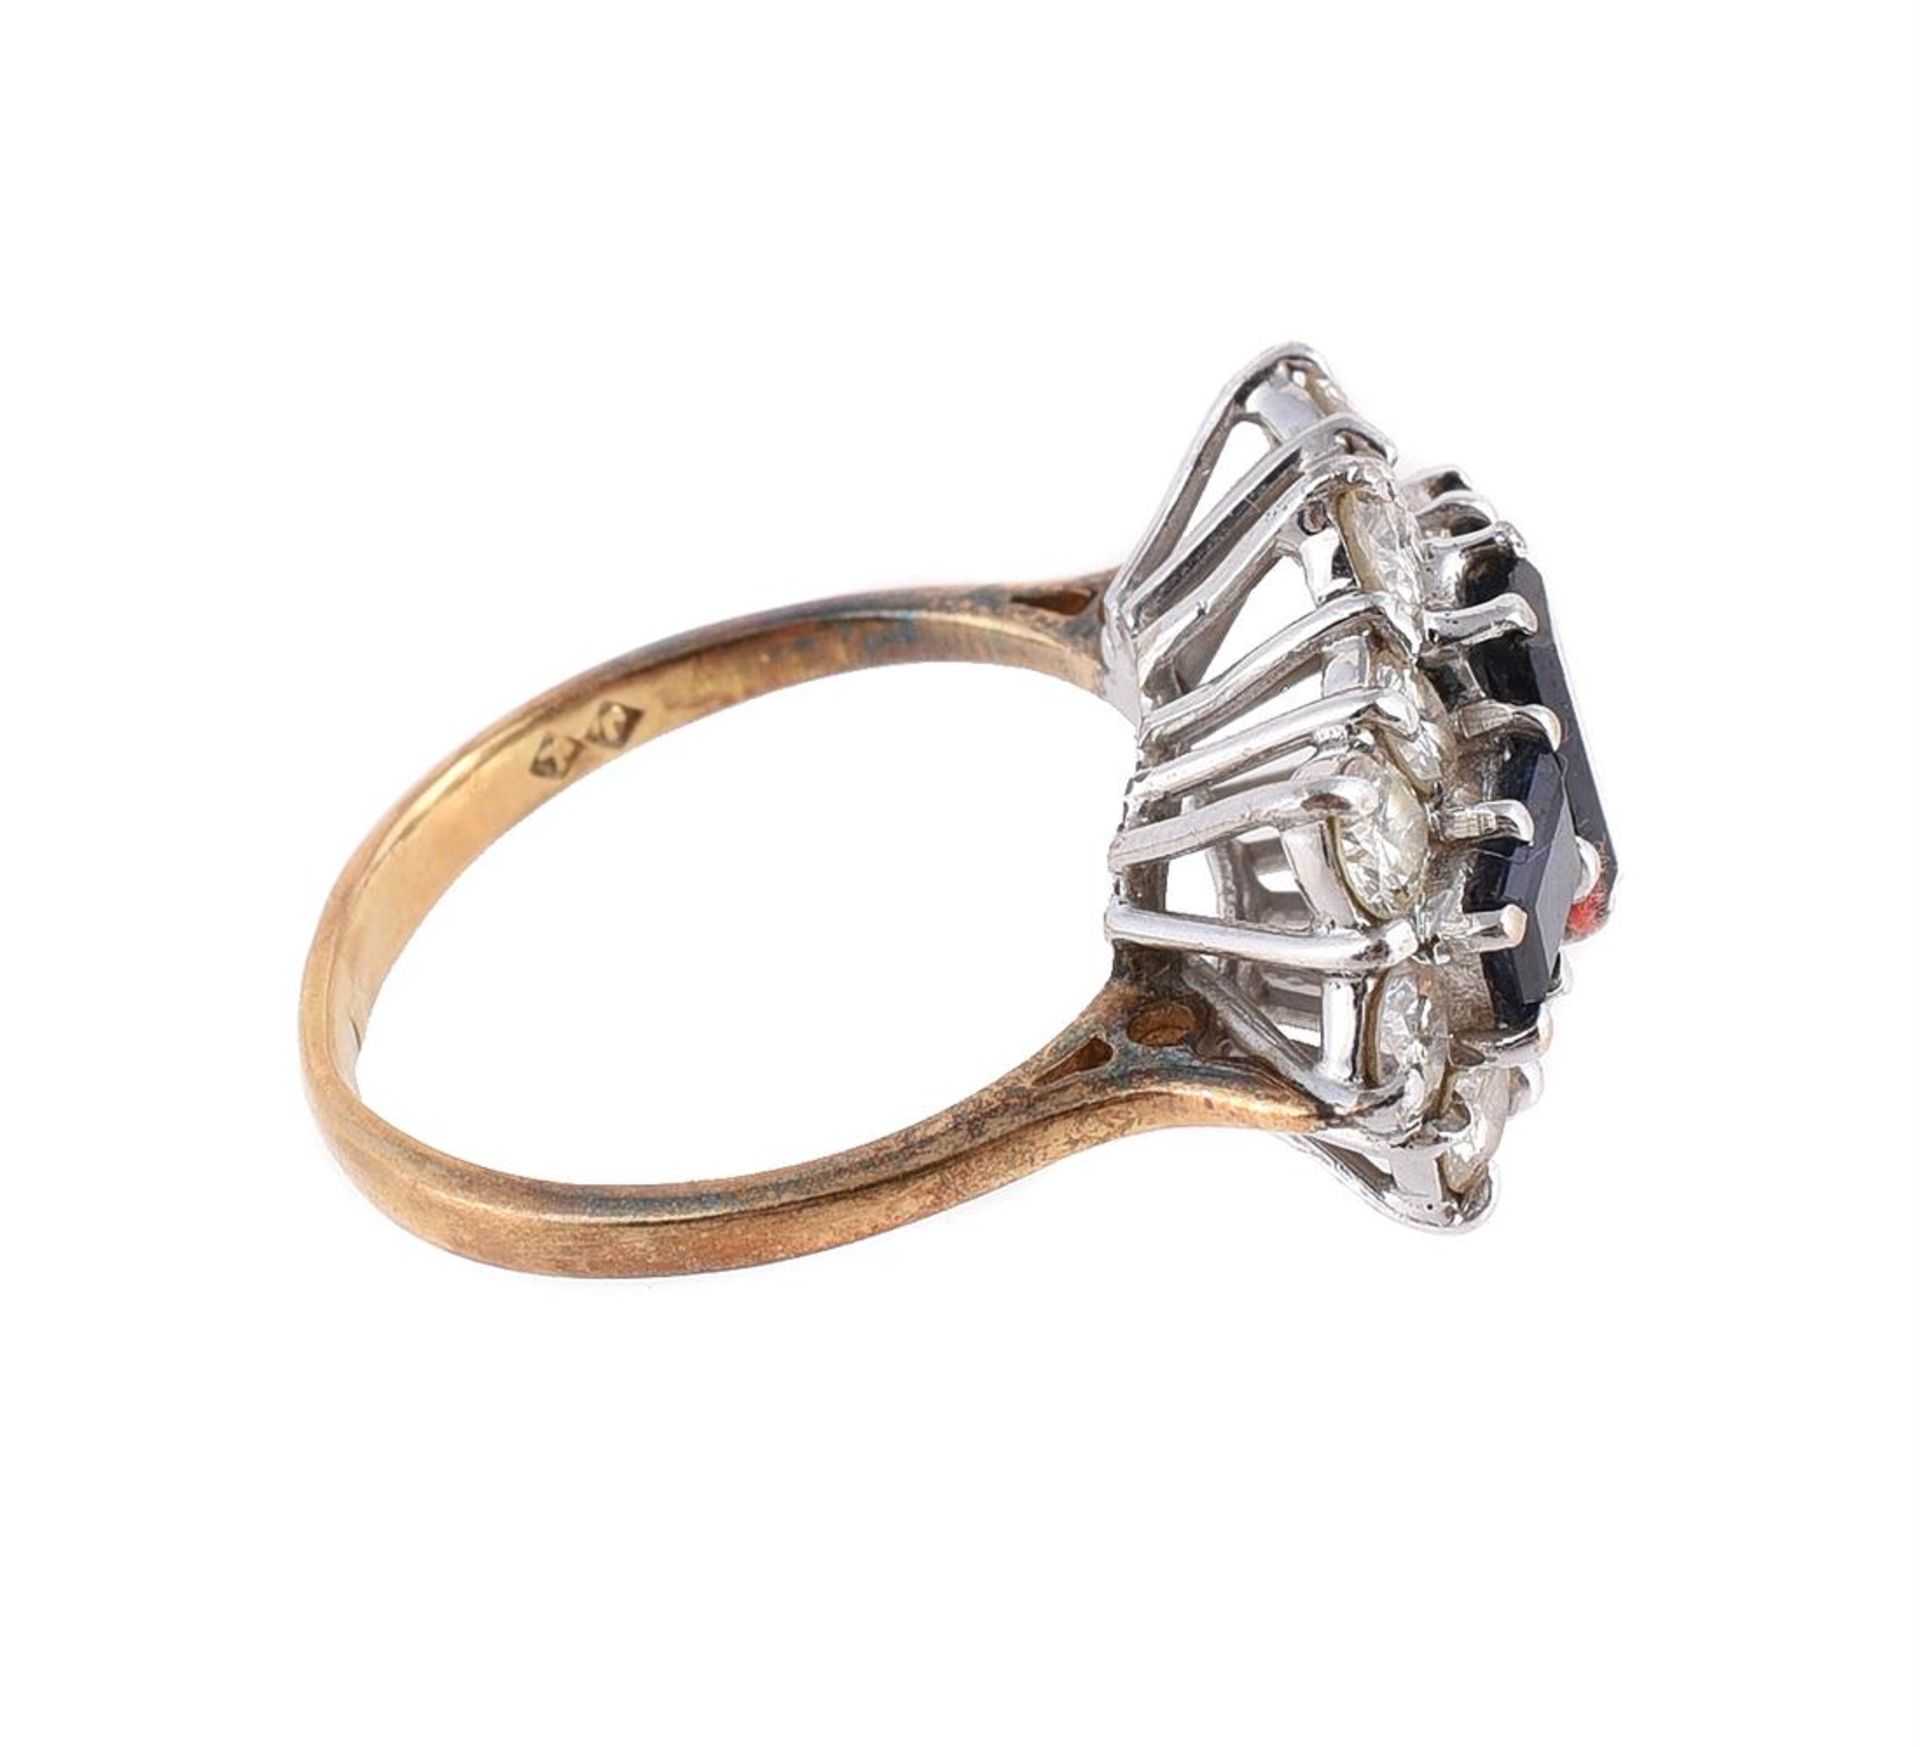 AN 18 CARAT GOLD, SAPPHIRE AND DIAMOND DRESS RING, LONDON 1979 - Image 2 of 2